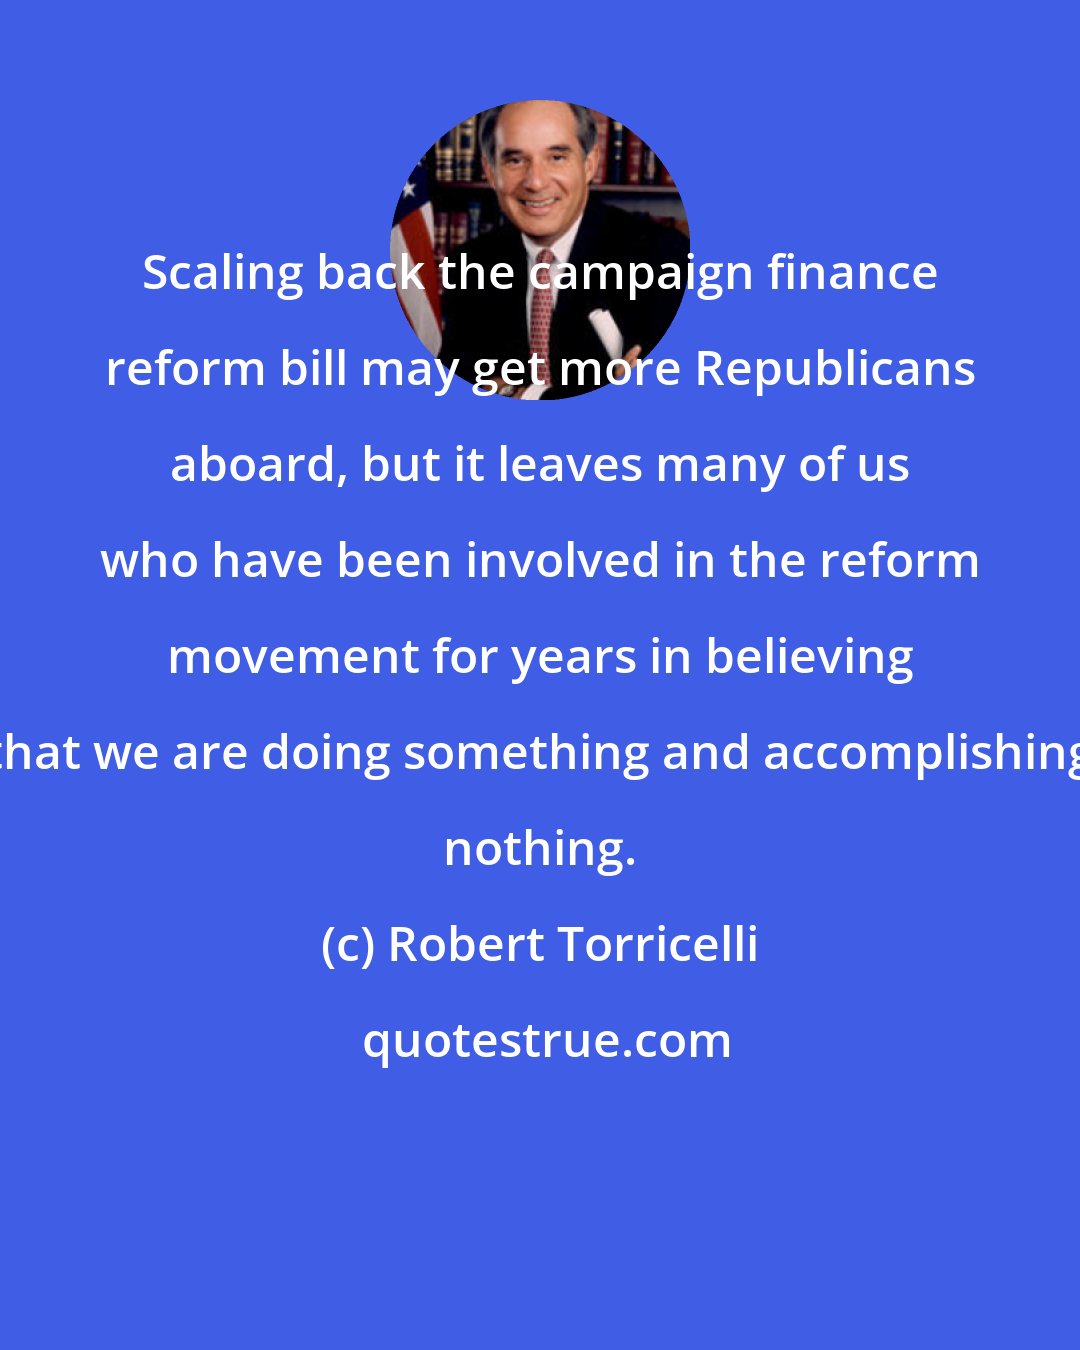 Robert Torricelli: Scaling back the campaign finance reform bill may get more Republicans aboard, but it leaves many of us who have been involved in the reform movement for years in believing that we are doing something and accomplishing nothing.